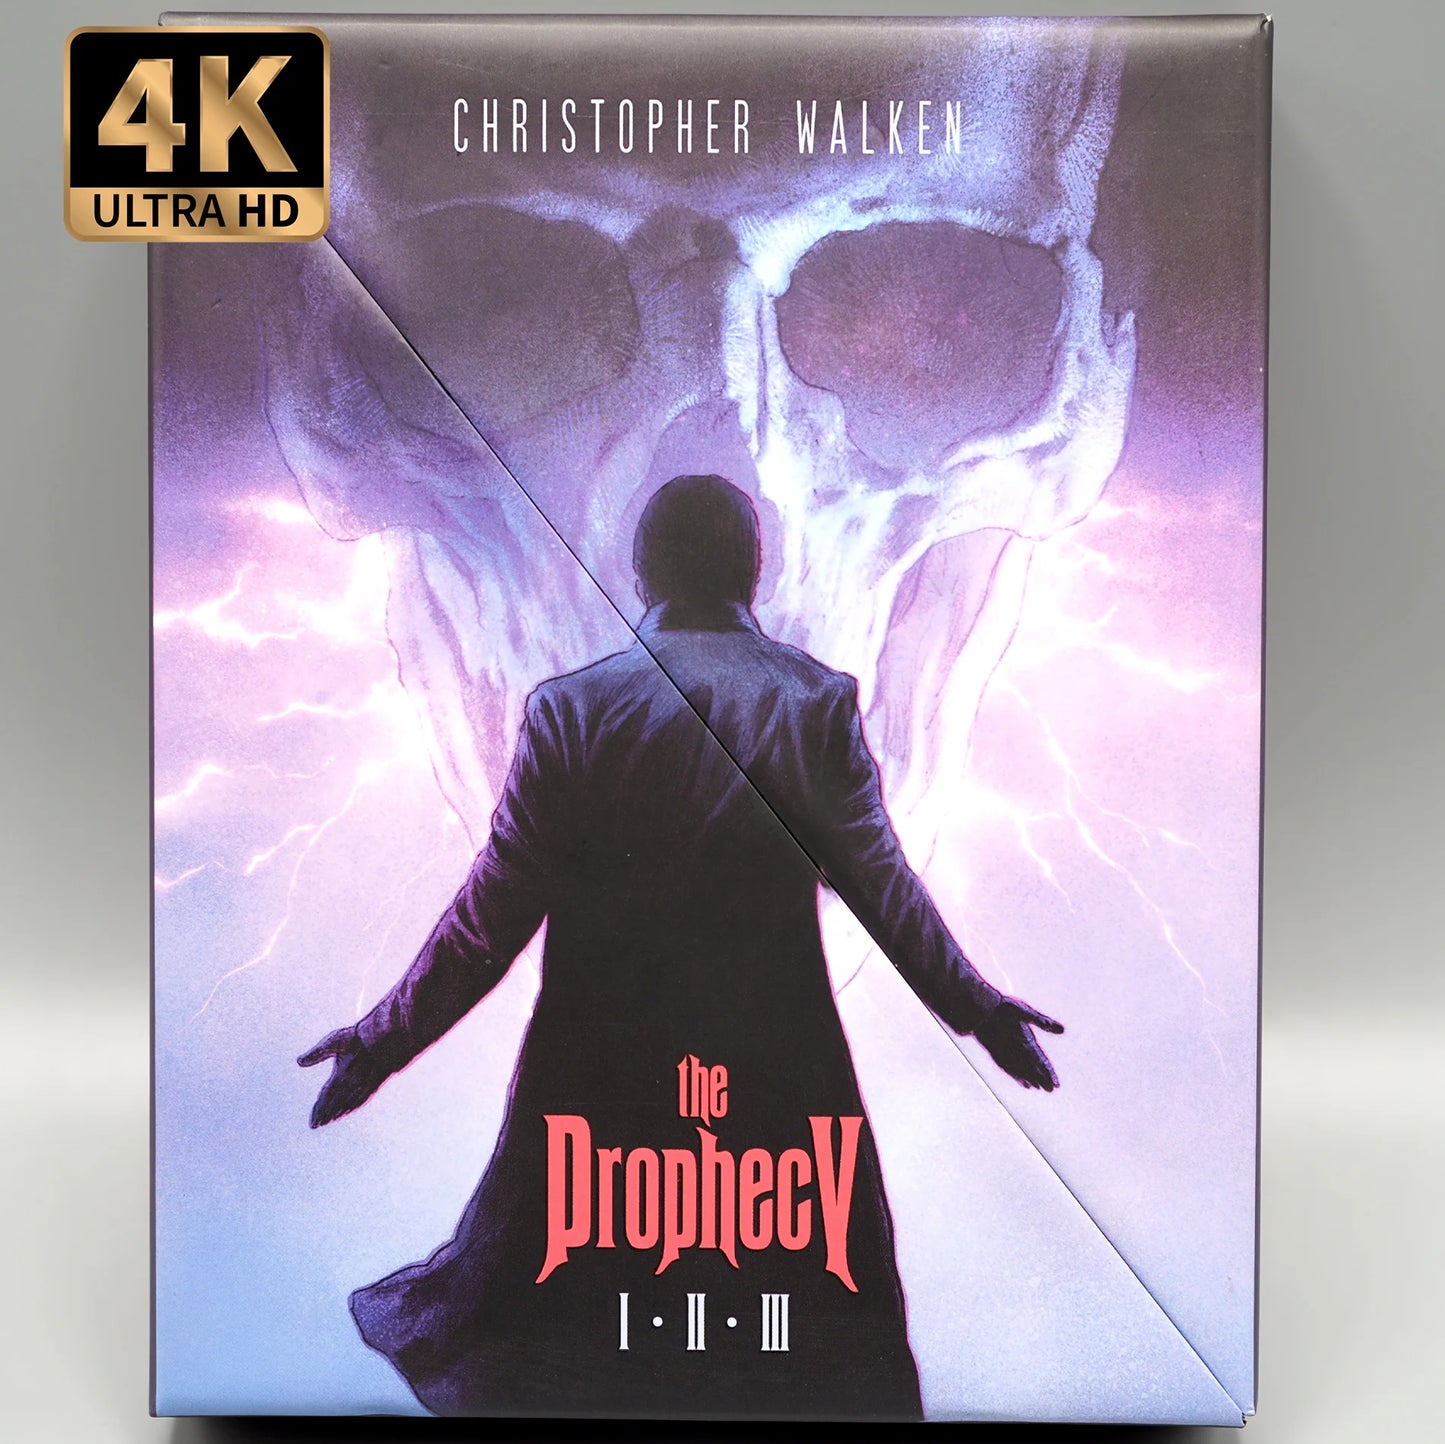 The Prophecy 1-3 4K UHD + Blu-ray Magnetic Diagonal Box + Slipcover Combo (Vinegar Syndrome) LIMIT OF 1 PER CUSTOMER (see note)